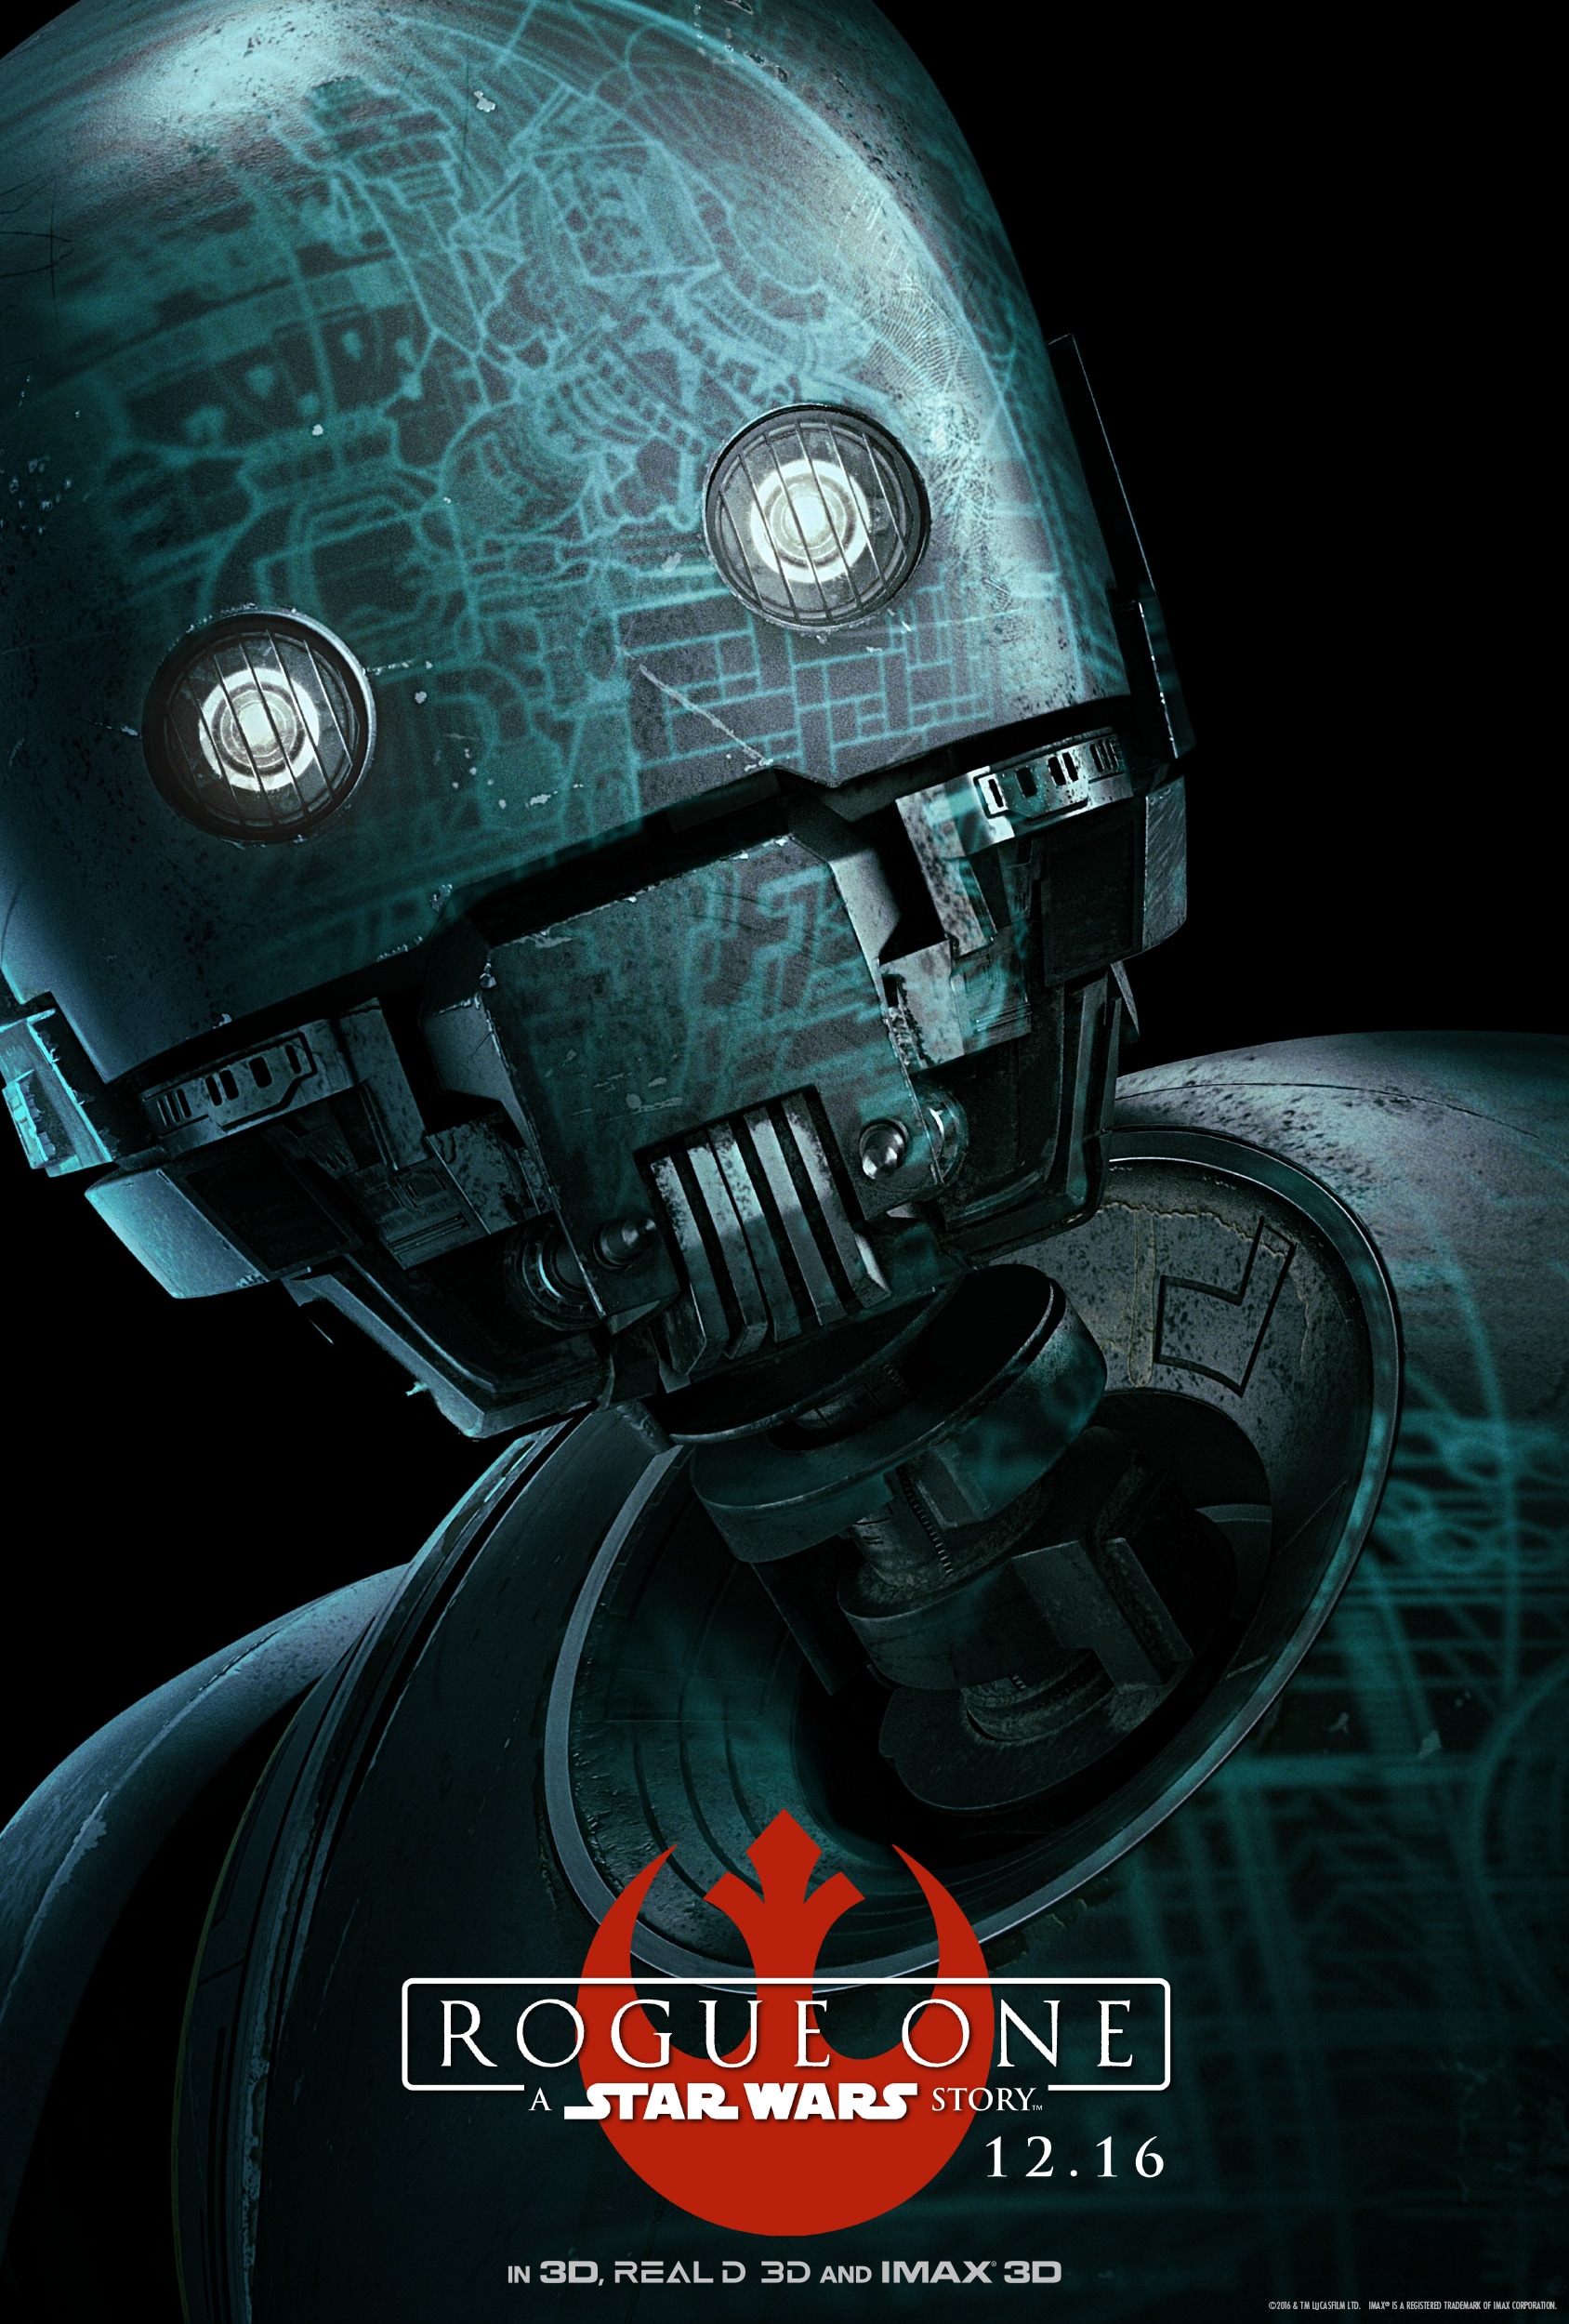 Rogue-One-K-2SO-Poster.jpg